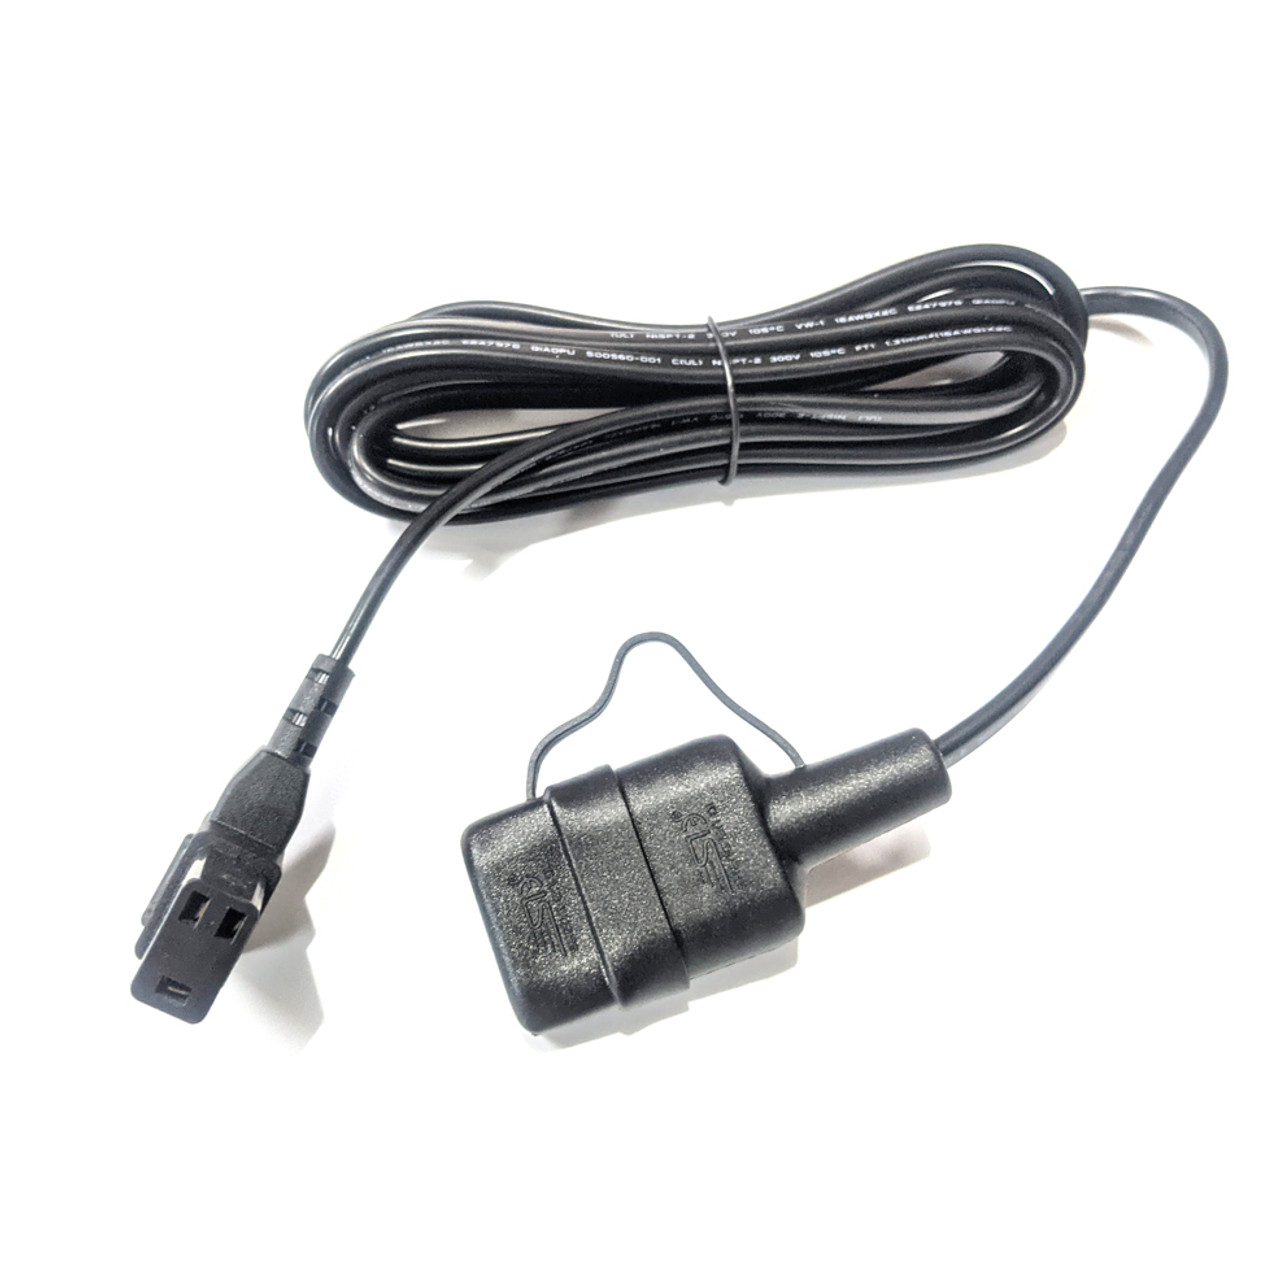 Anderson Style Plug to Twin Cigarette Socket Adapter Cable Lead